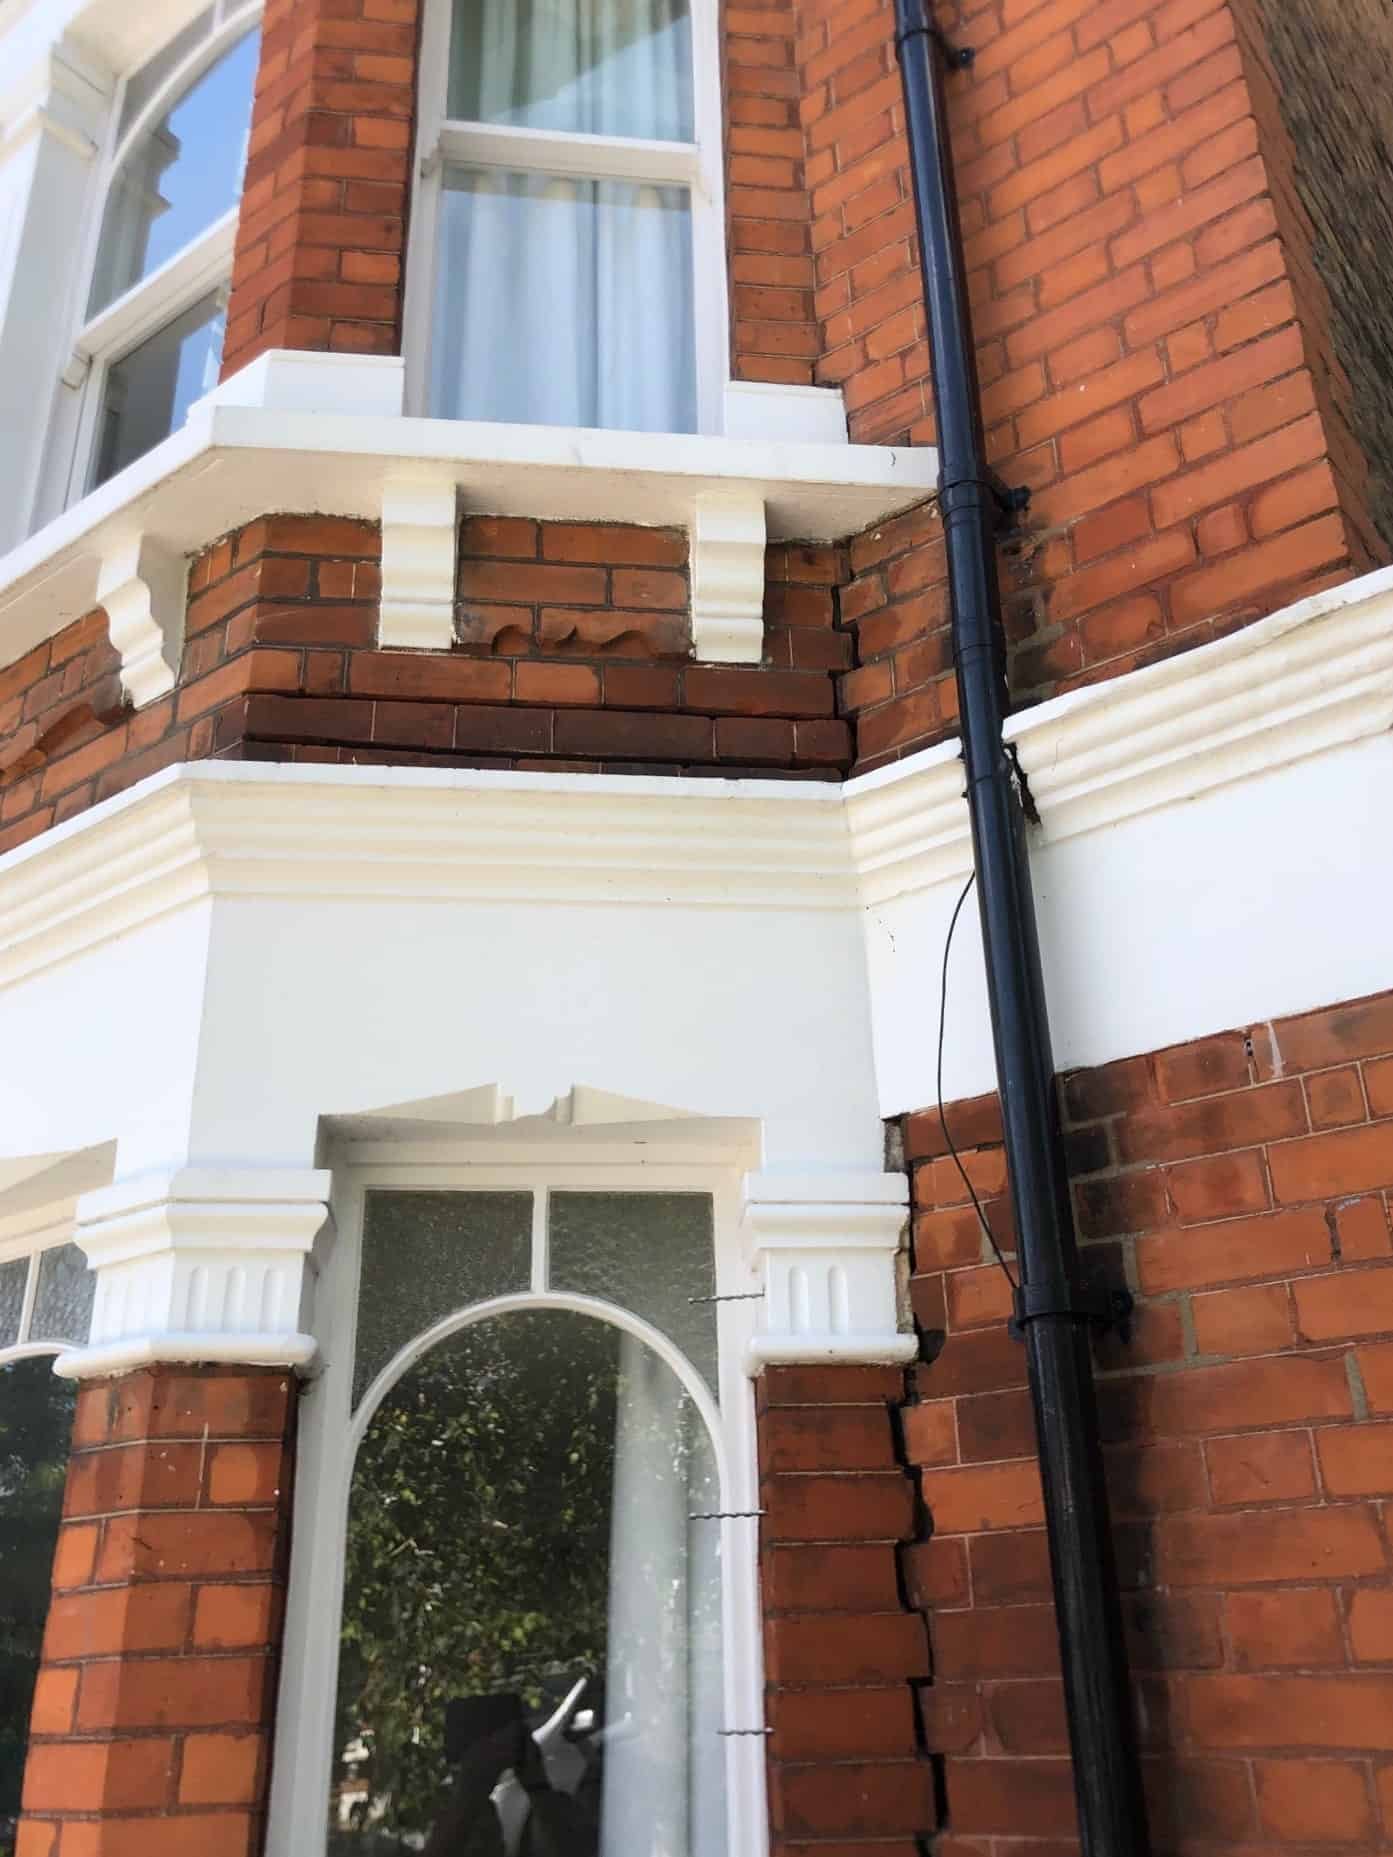 Vertical crack where bay window has detached from main structure